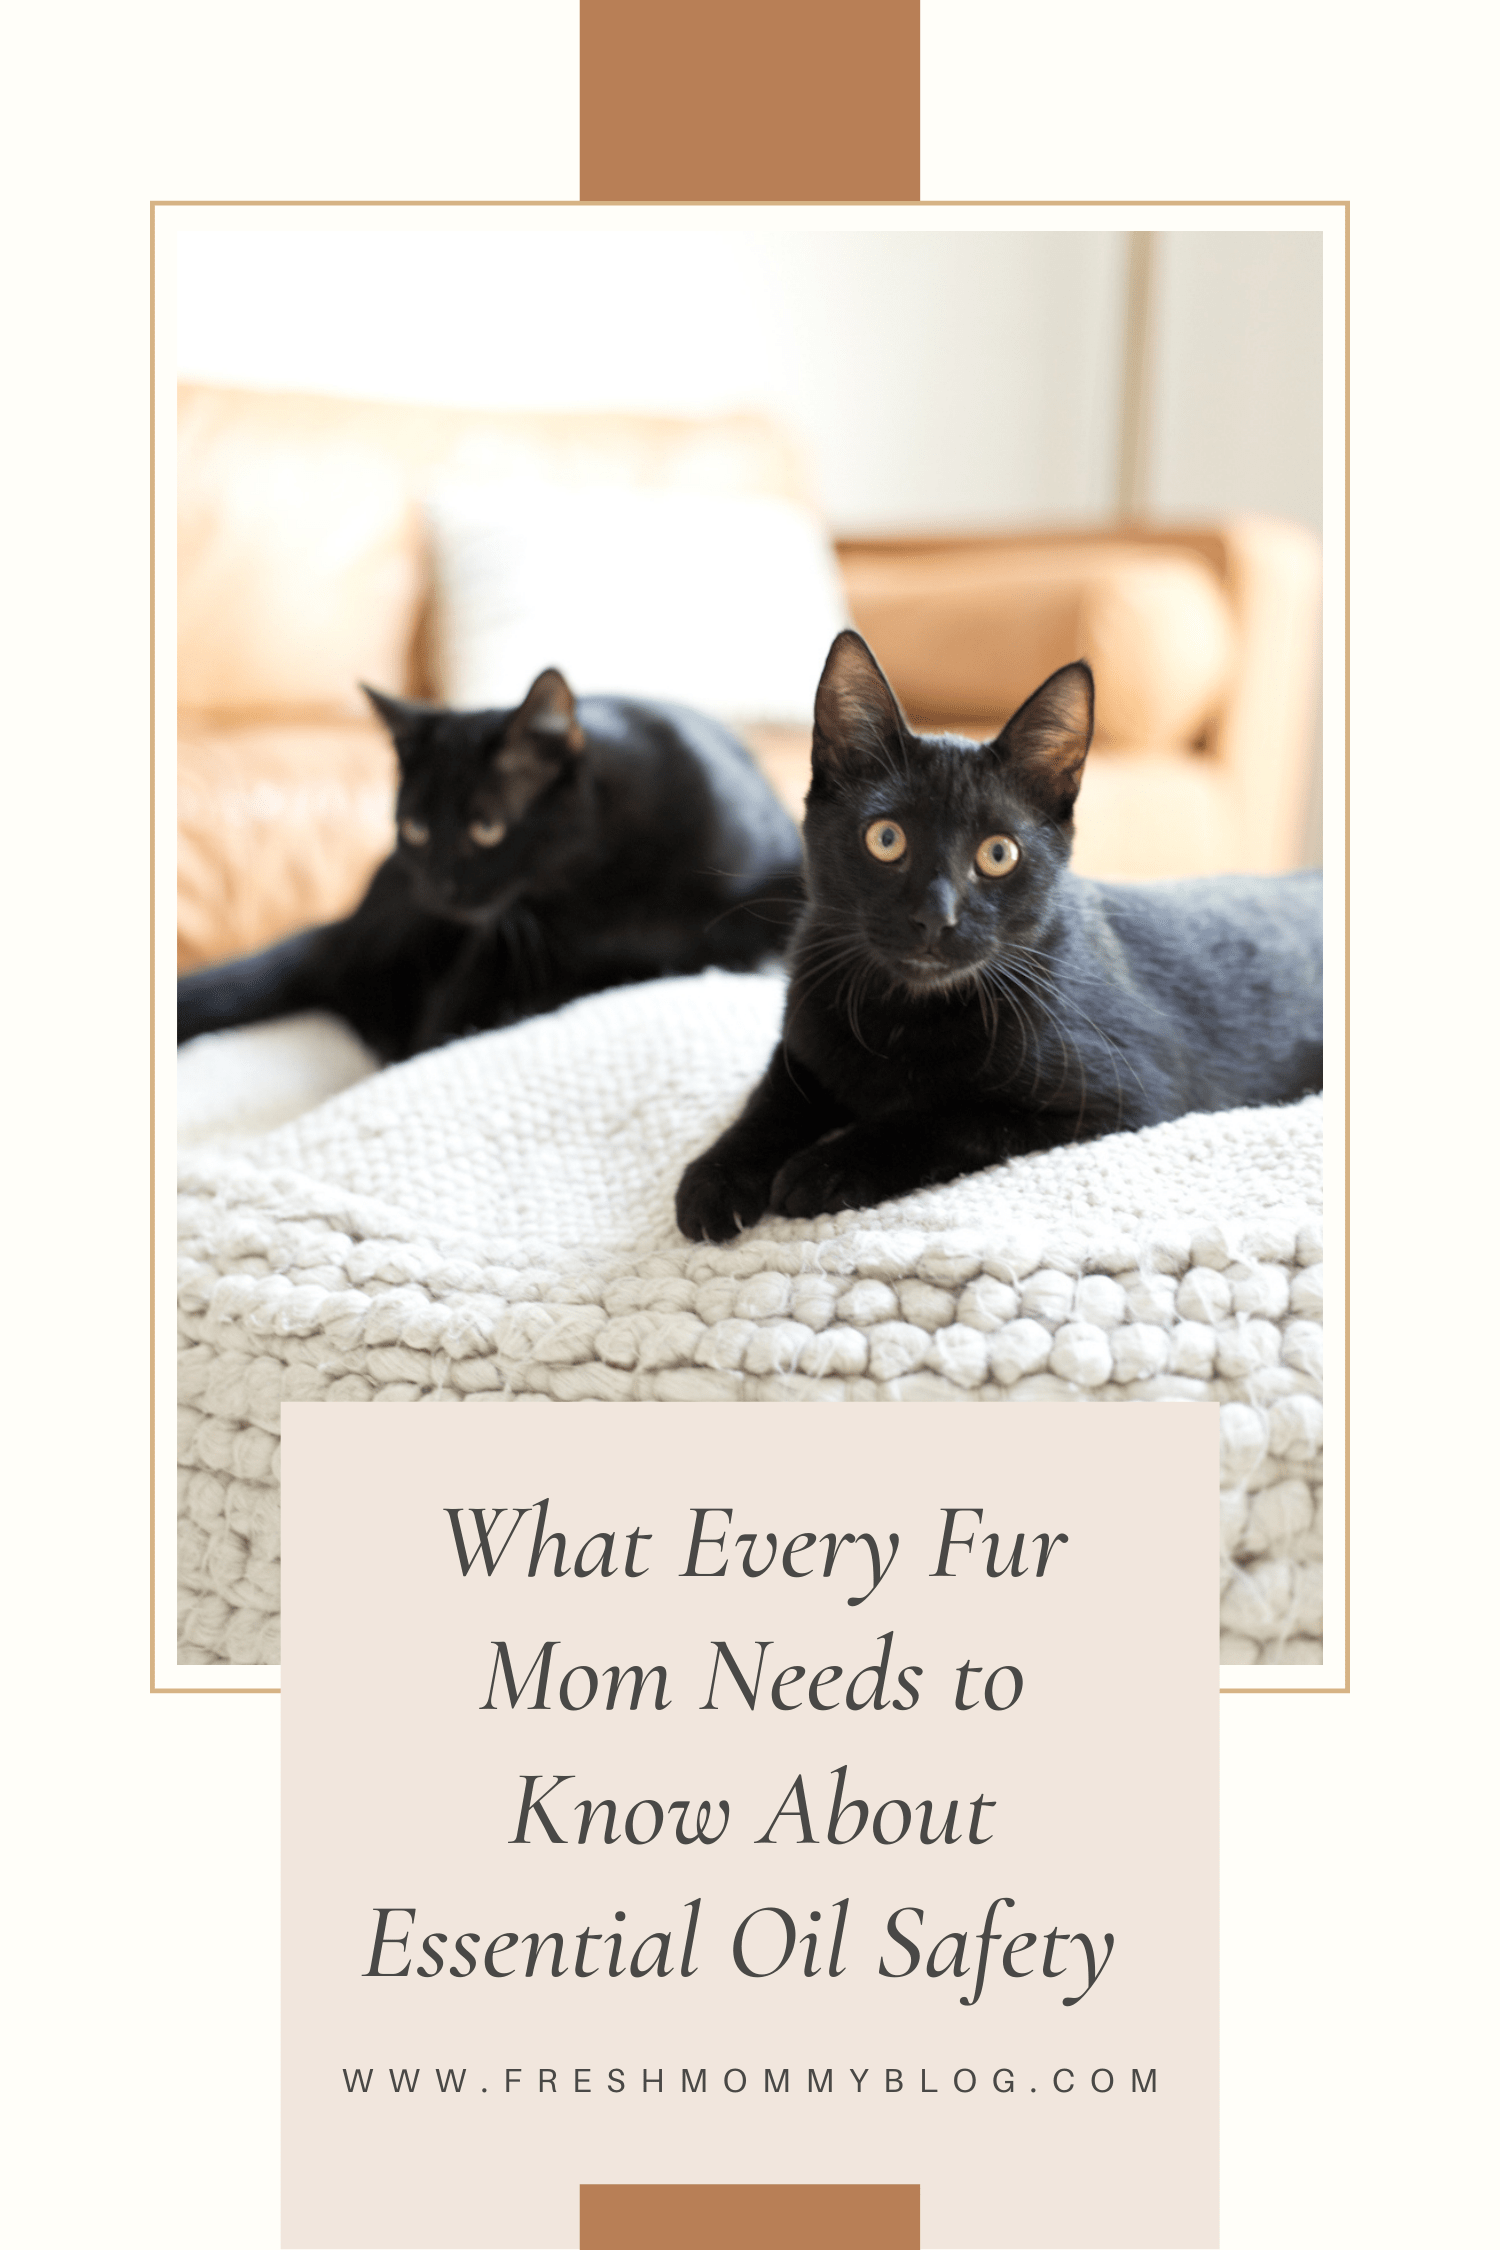 Essential Oil Safe for Cats | Fresh Mommy Blog